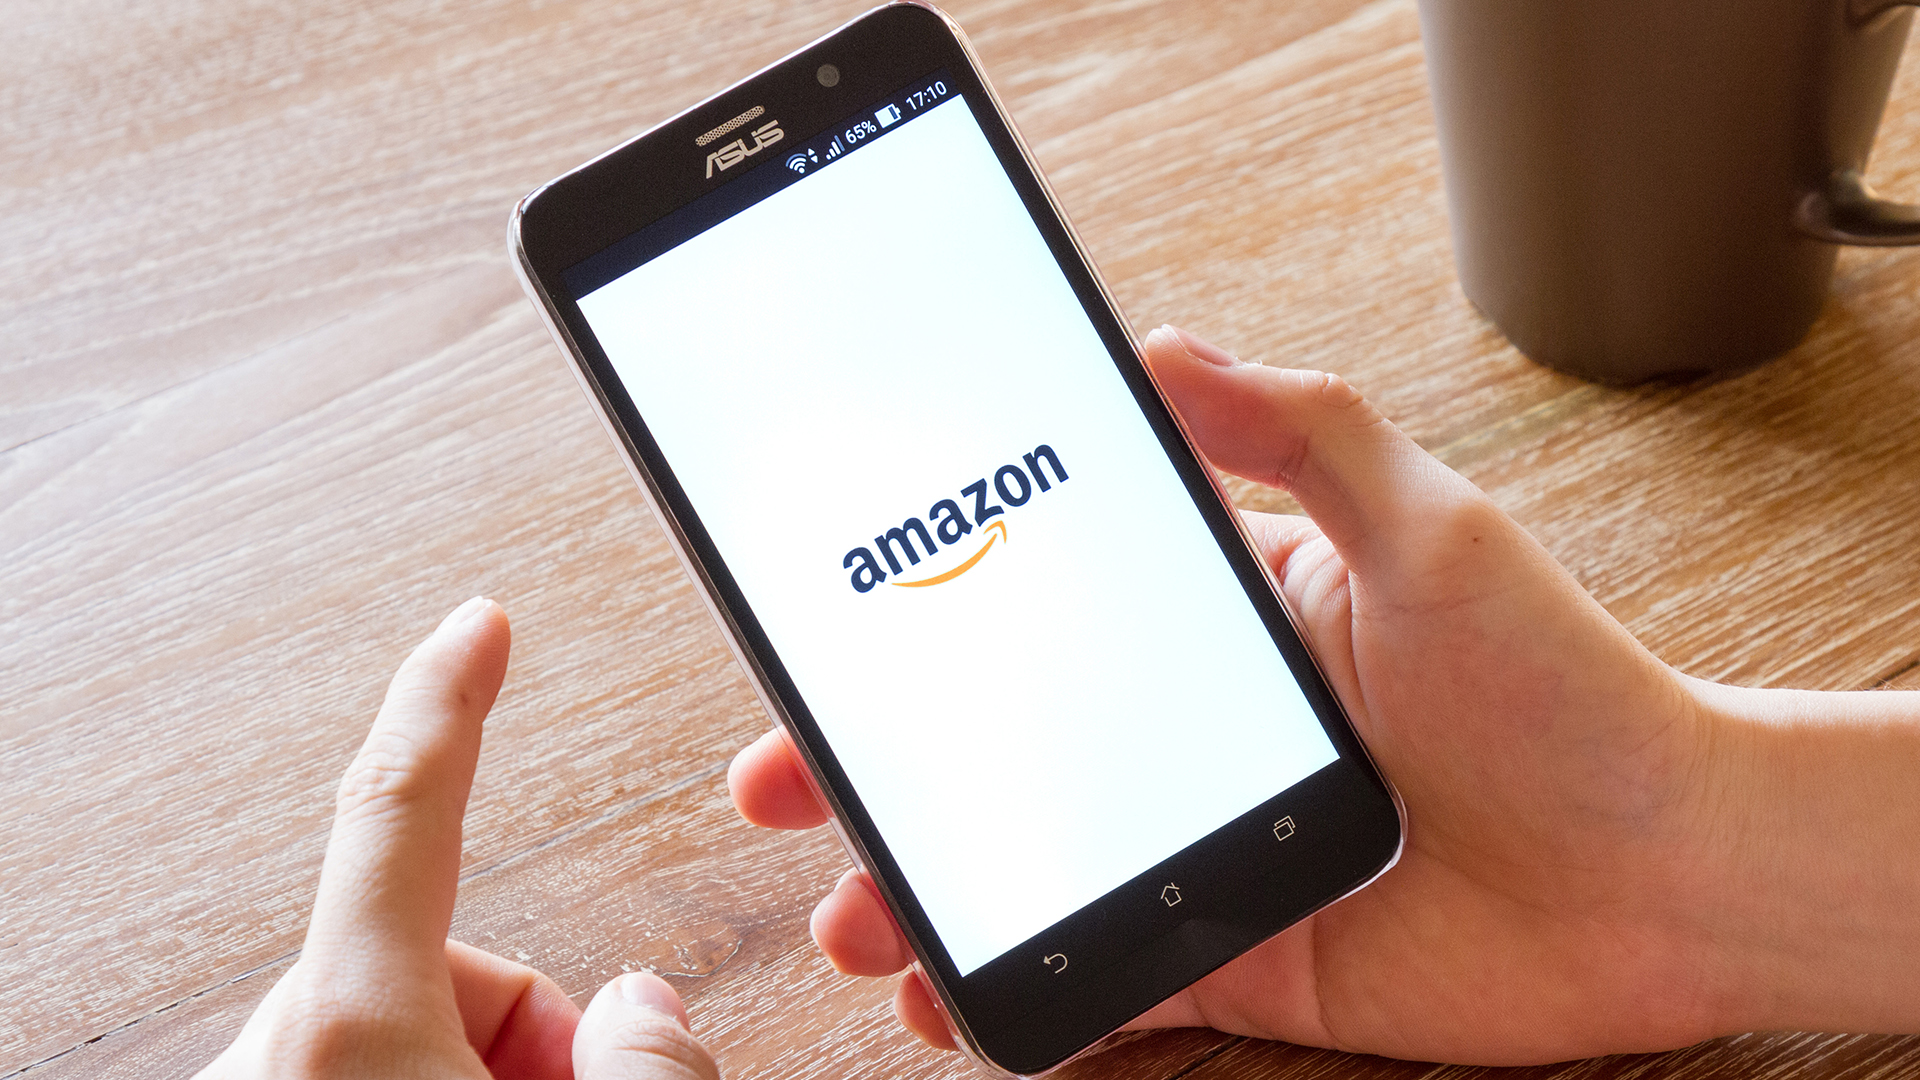 Warning over Amazon invoice scam which could let hackers steal your information